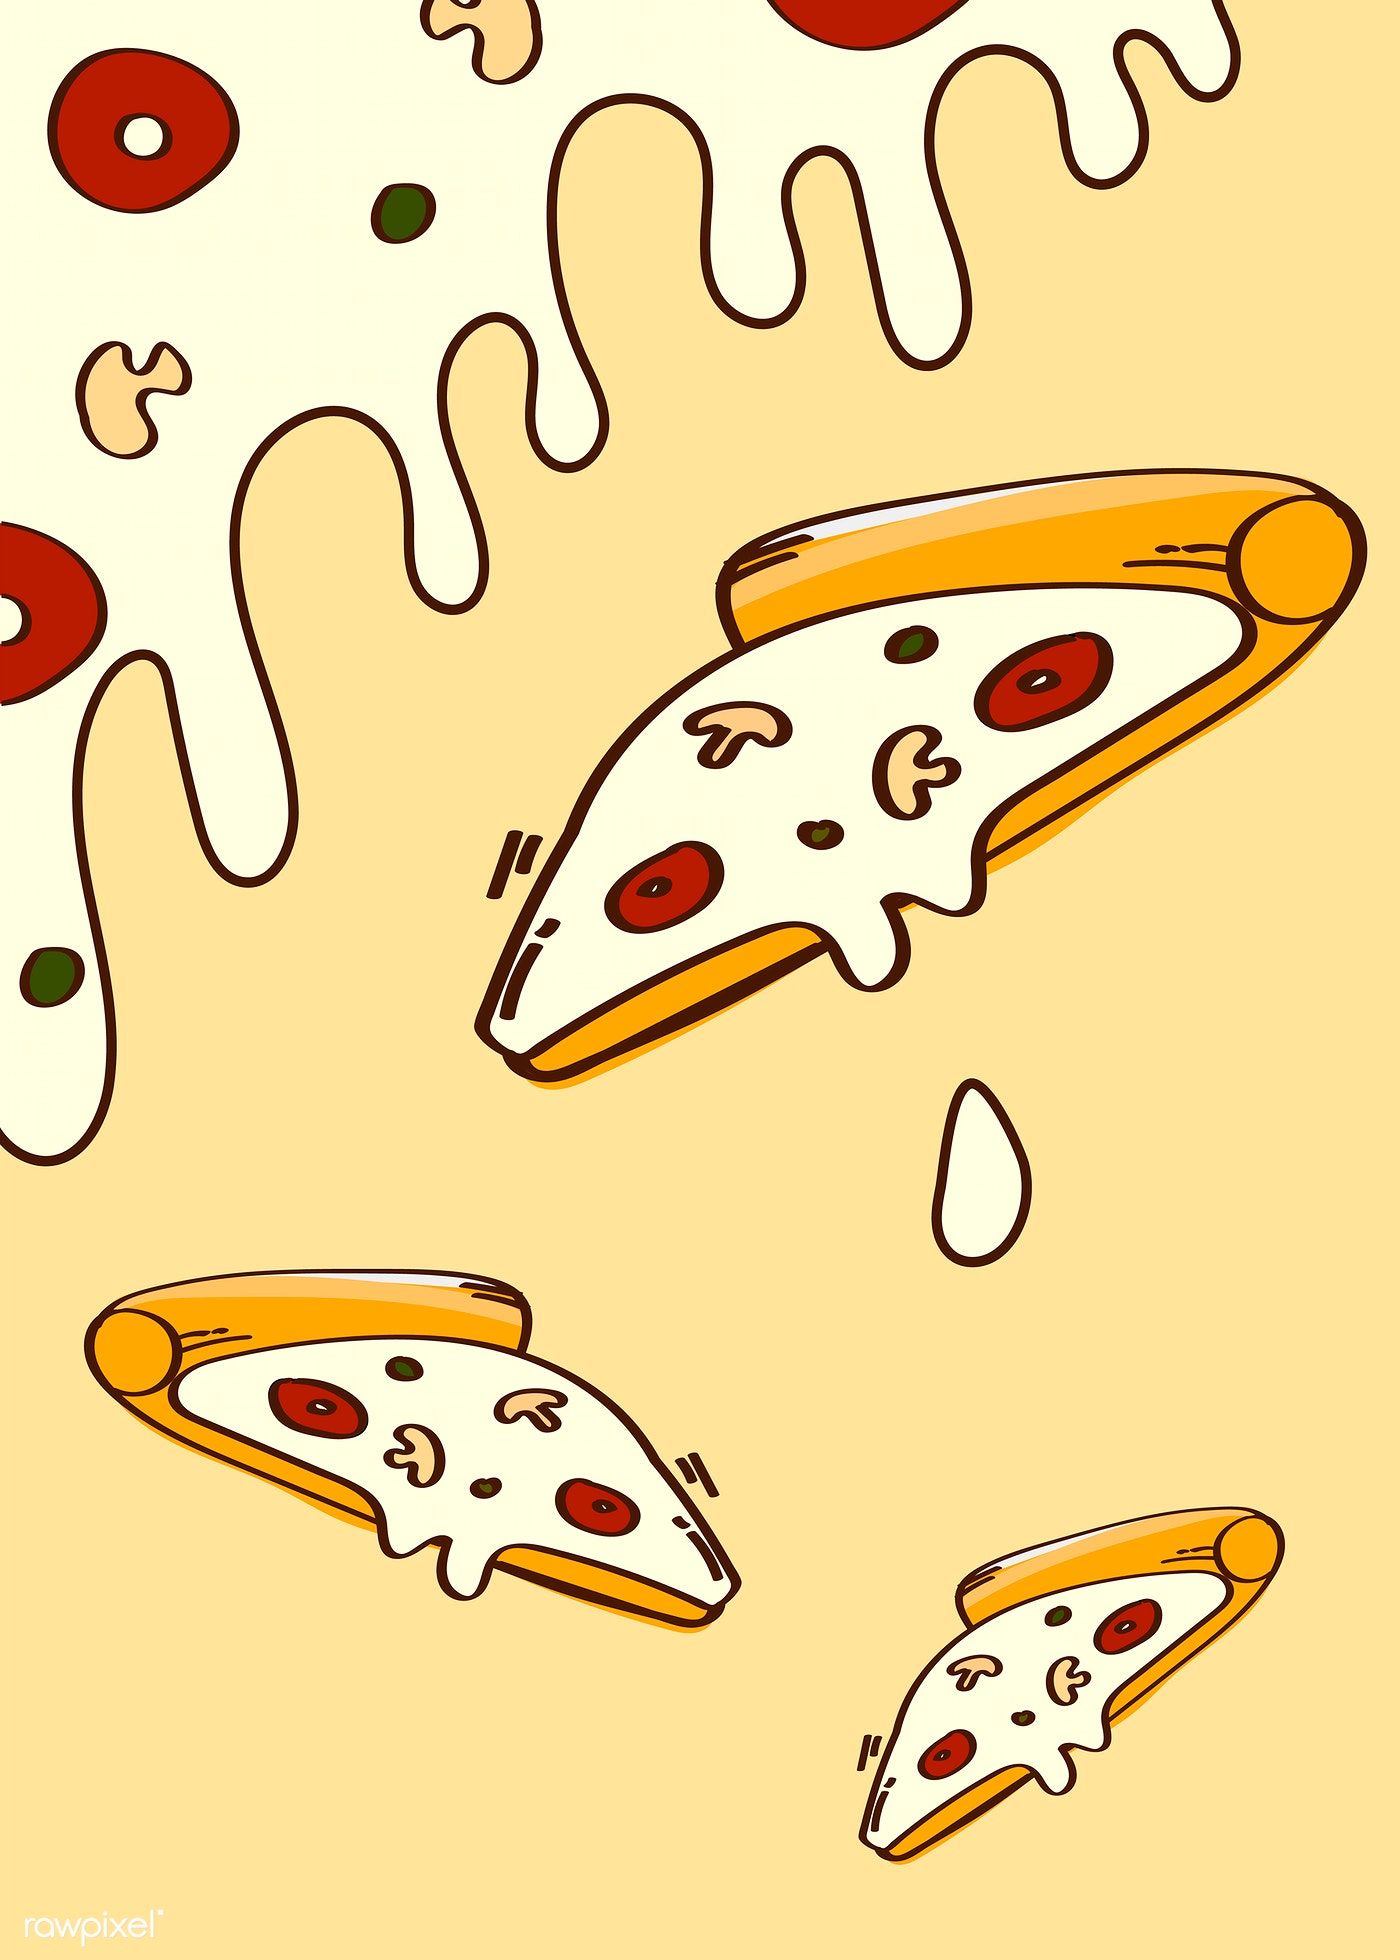 Pizza doodle patterned background vector. free image / nap #vector #pattern. Doodle patterns, Vector background pattern, Vector free